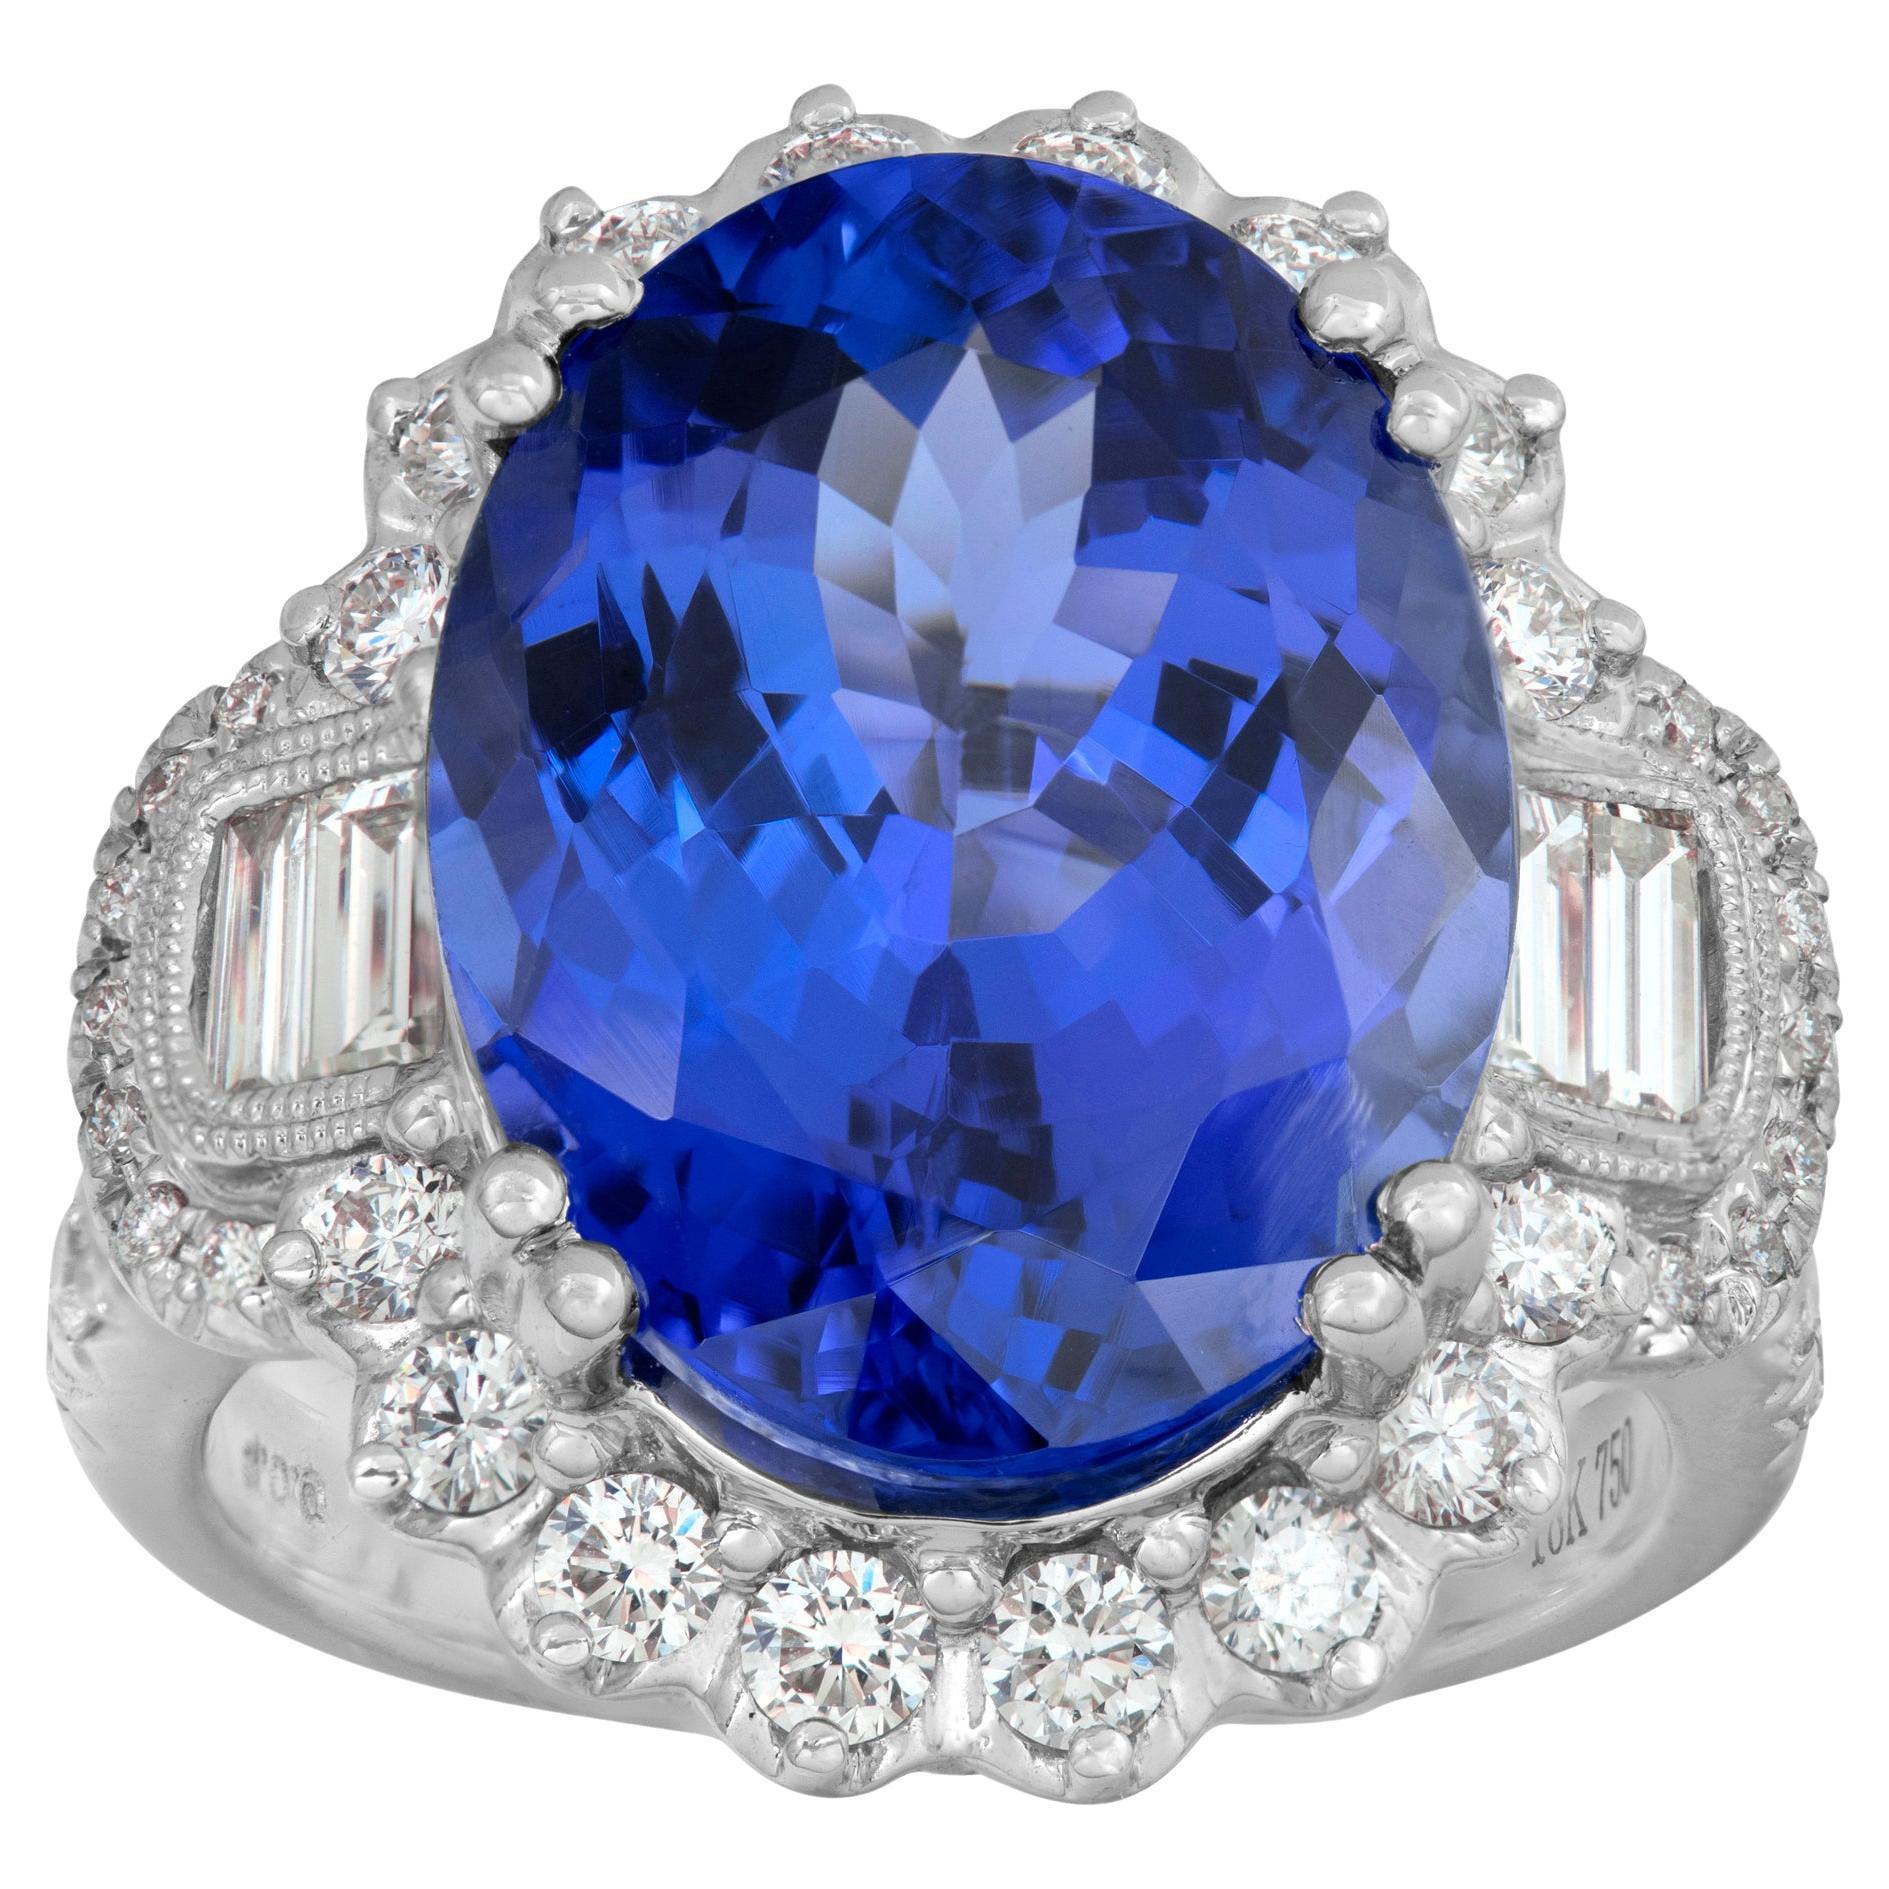 Tanzanite ring with diamonds in white gold with yellow gold accents